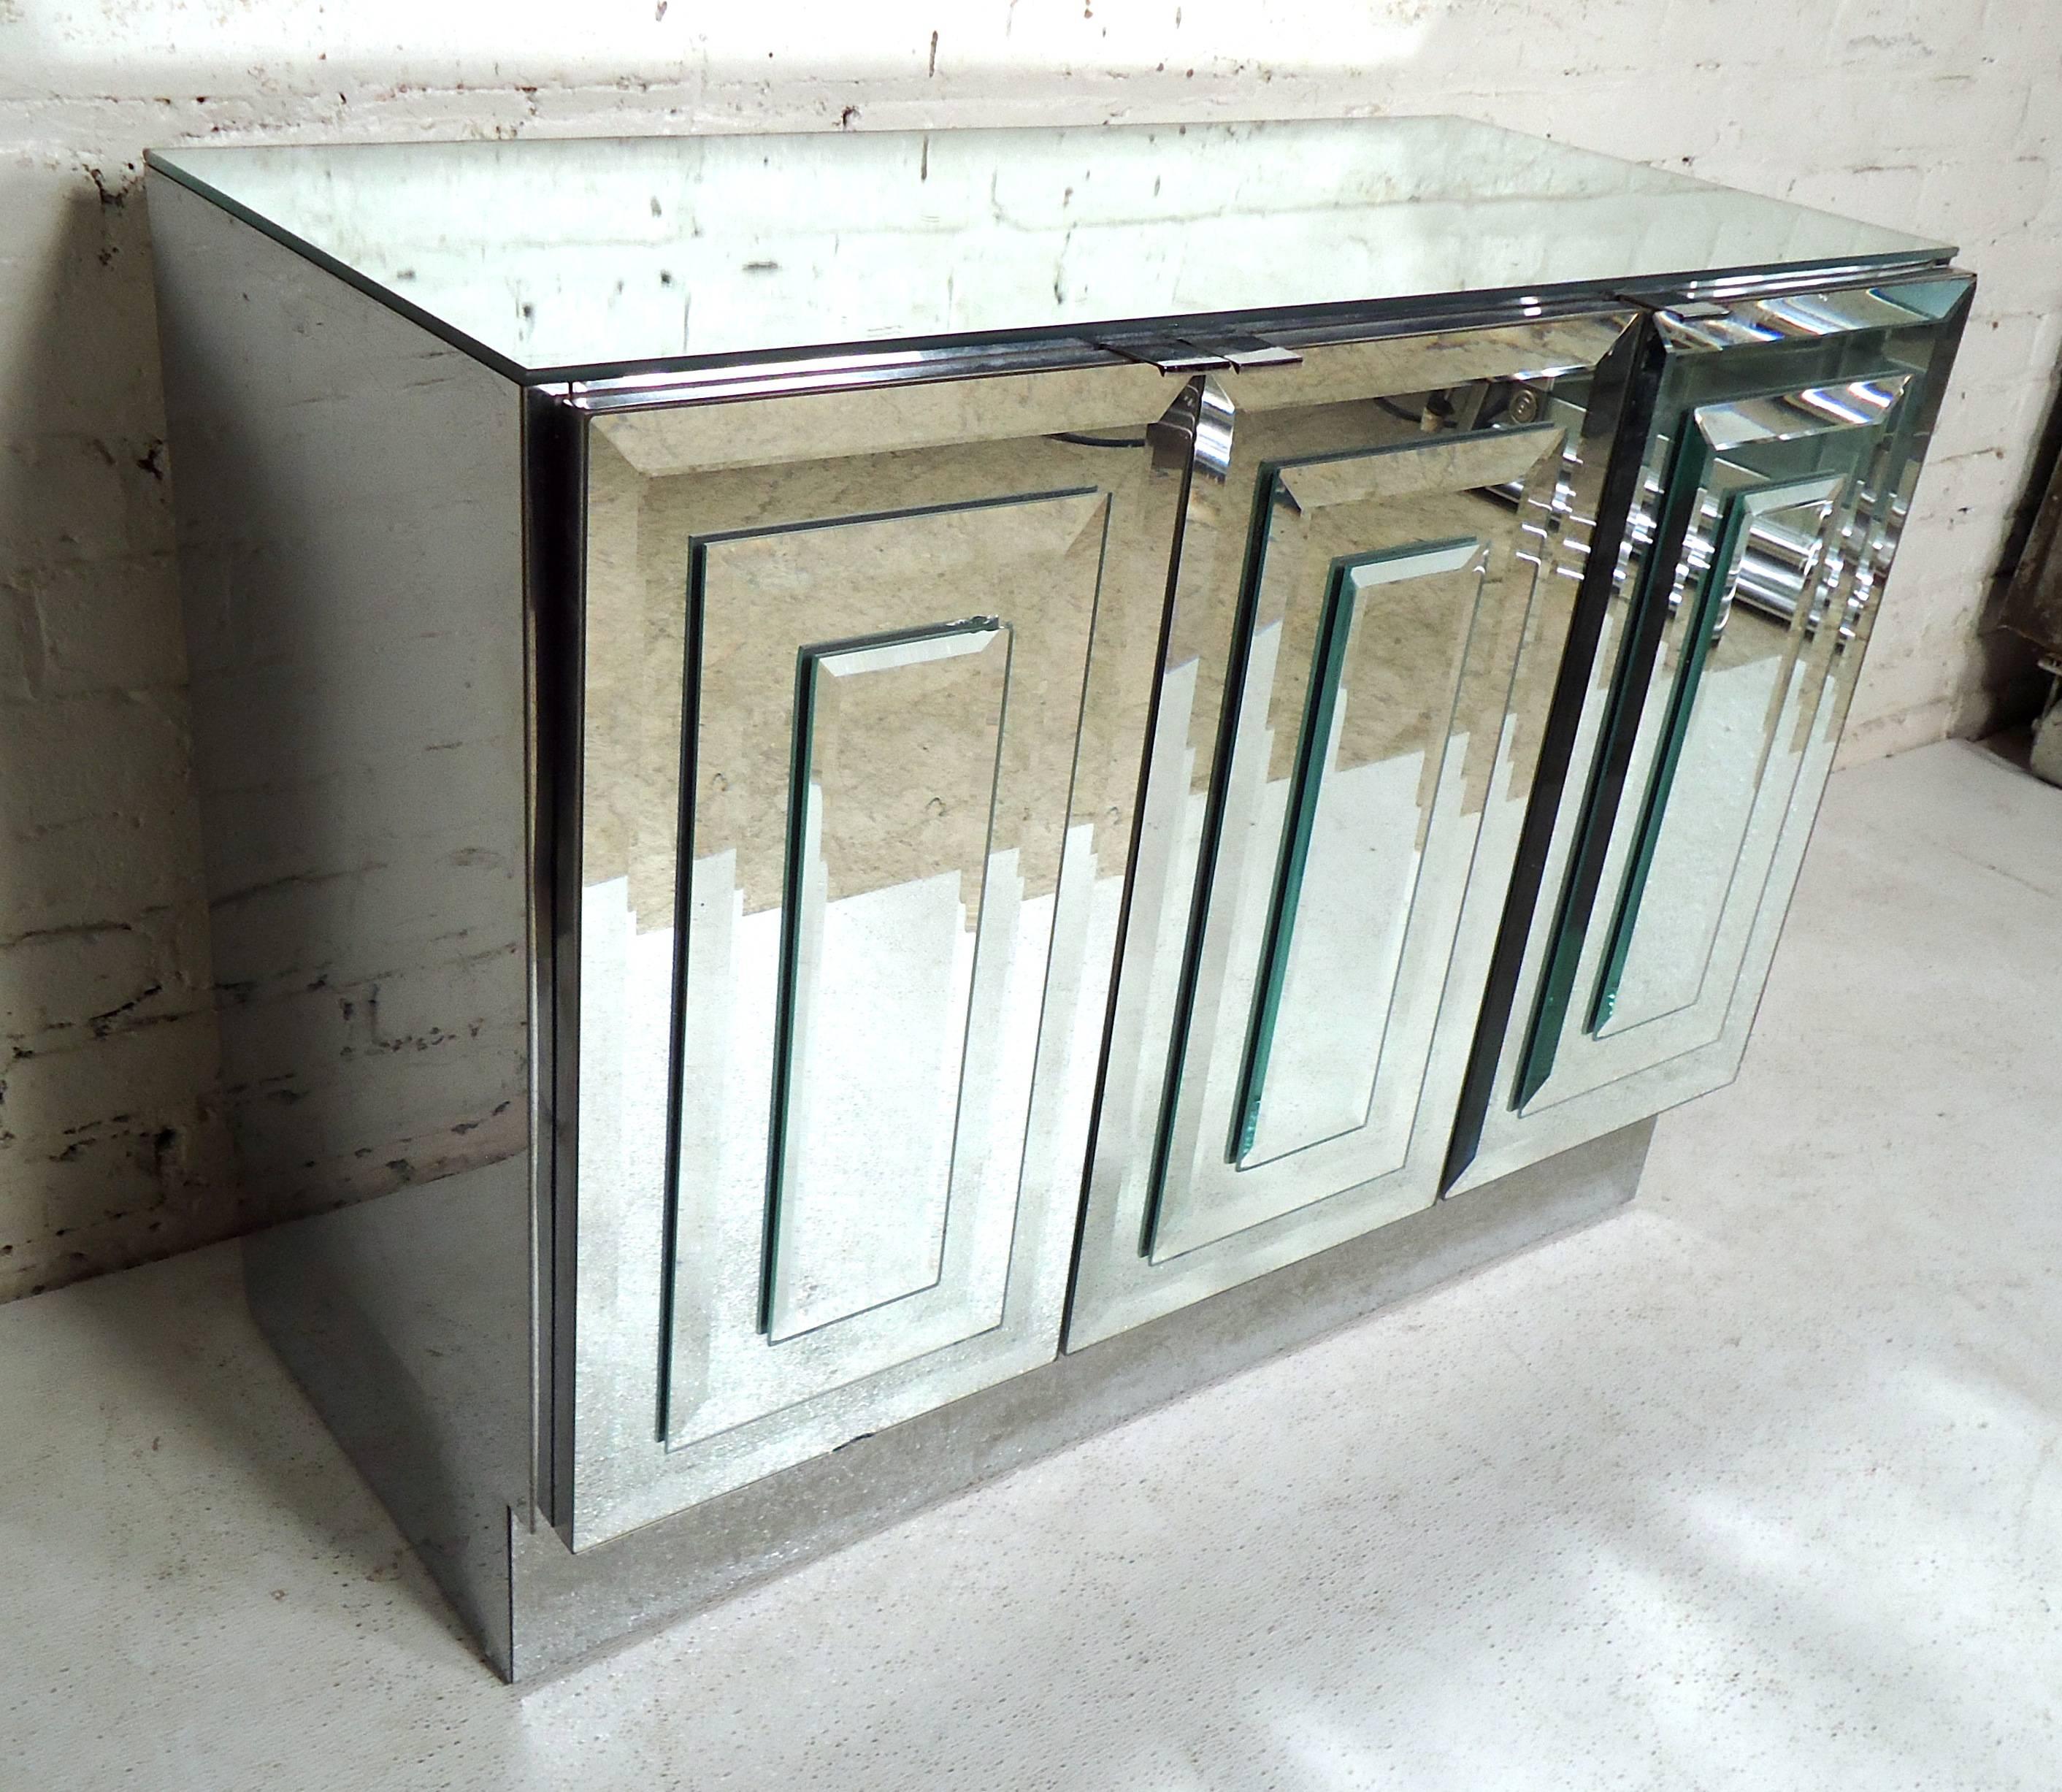 This stylish Mid-Century Modern cabinet features elegant mirrored finish, with sculptural glass fronts and sides. Interior cabinet space offers adjustable shelf storage ideal for bedside or living room use. Please confirm item location (NY or NJ).